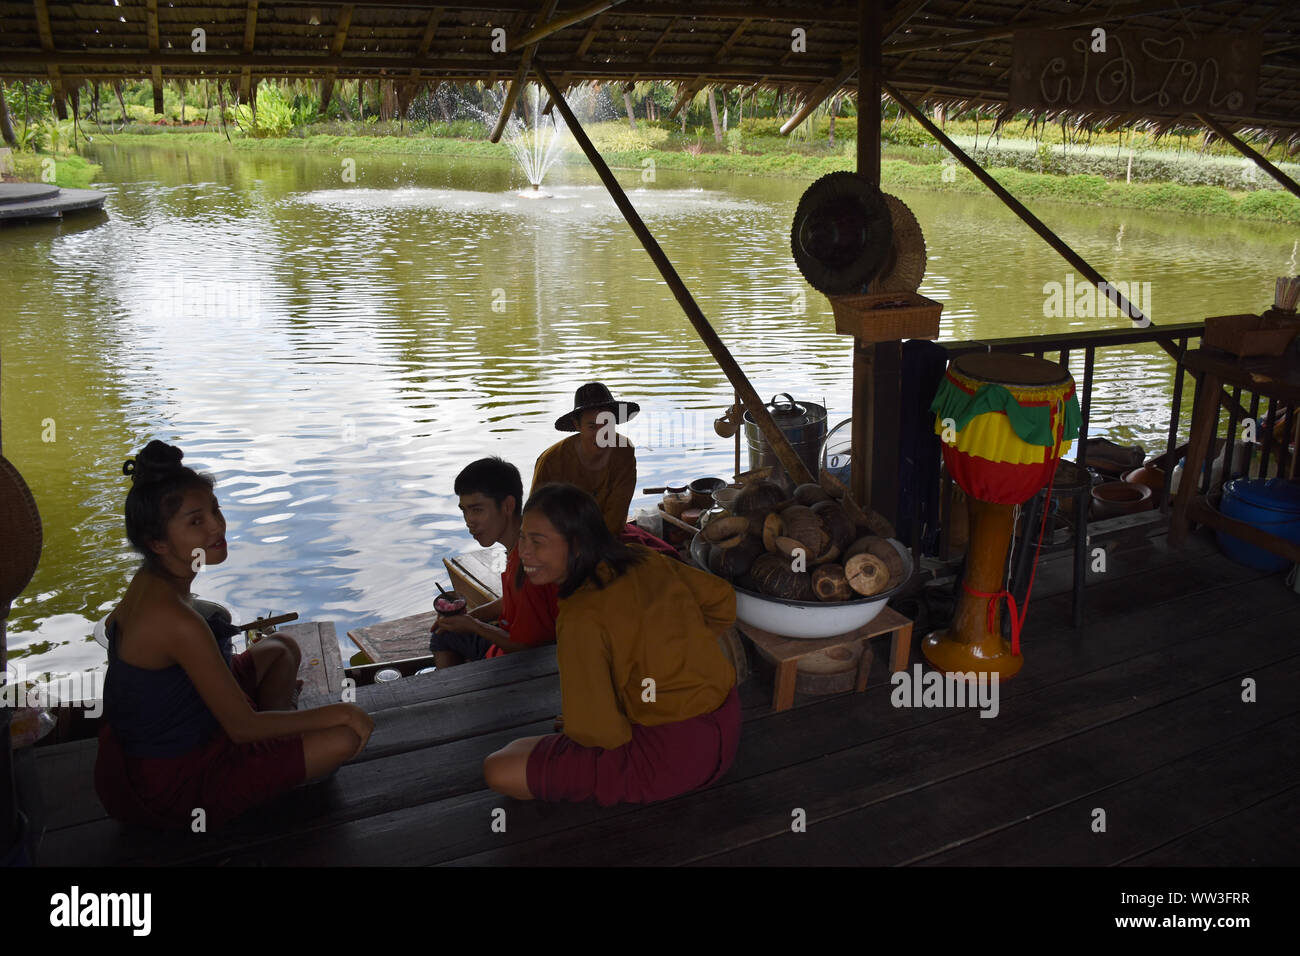 Kanchanaburi, Thailand, 09.09.2019: Local Thai people in traditional Thai, Siamese dresses are resting and eating on the lake on a floating house in t Stock Photo